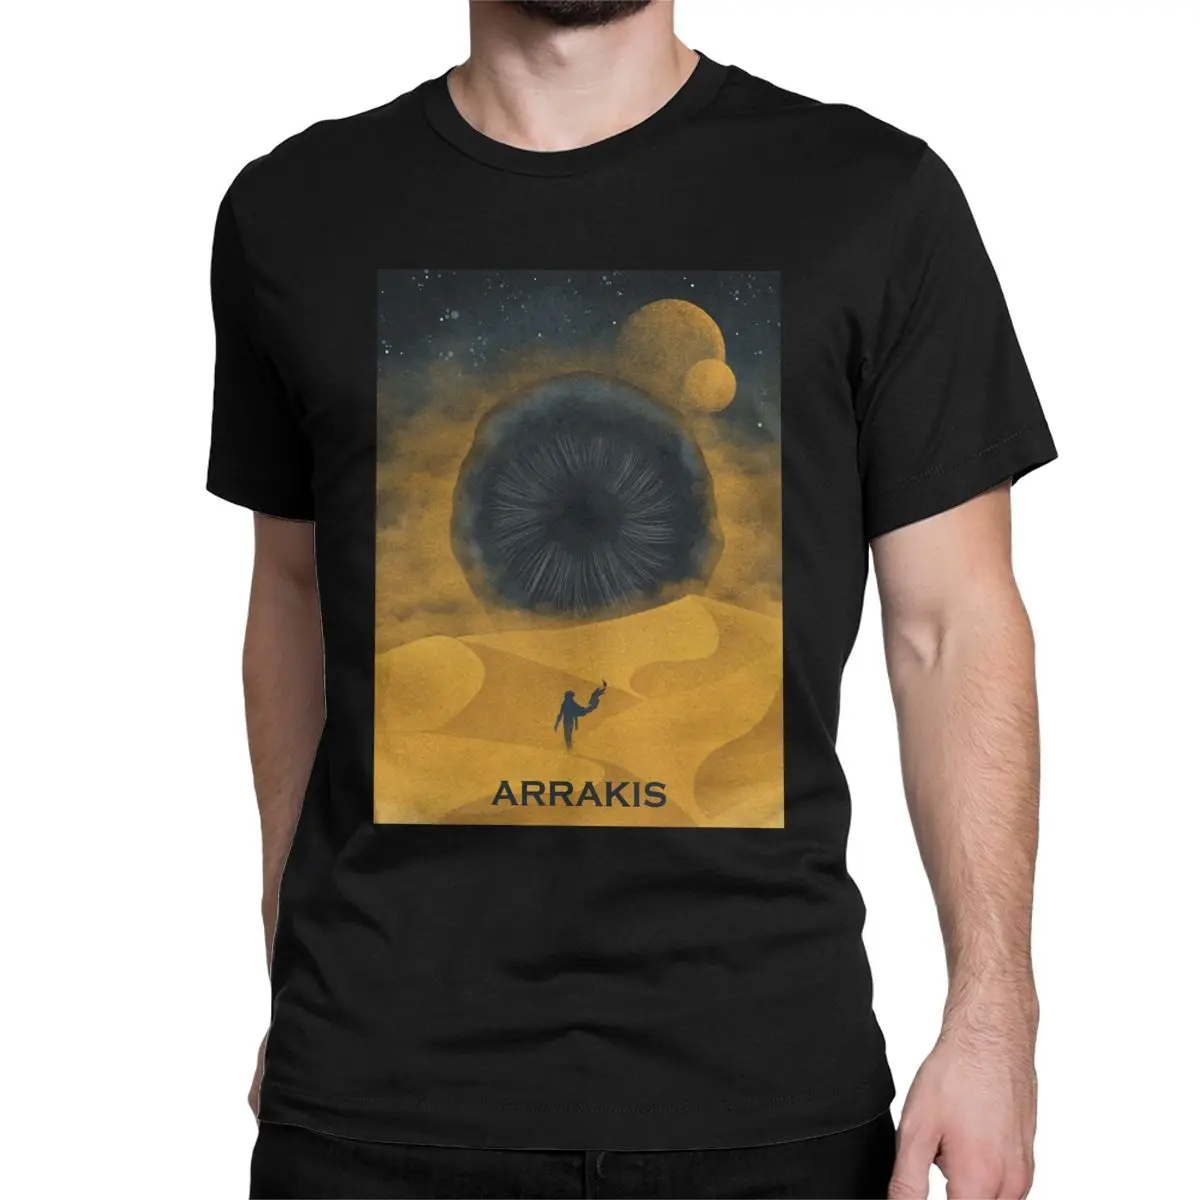 

Arrakis The Great Shai Hulud, Yellow Sand DUNE T-Shirts for Men Crew Neck Pure Cotton T Shirt Short Sleeve Tees Party Clothing